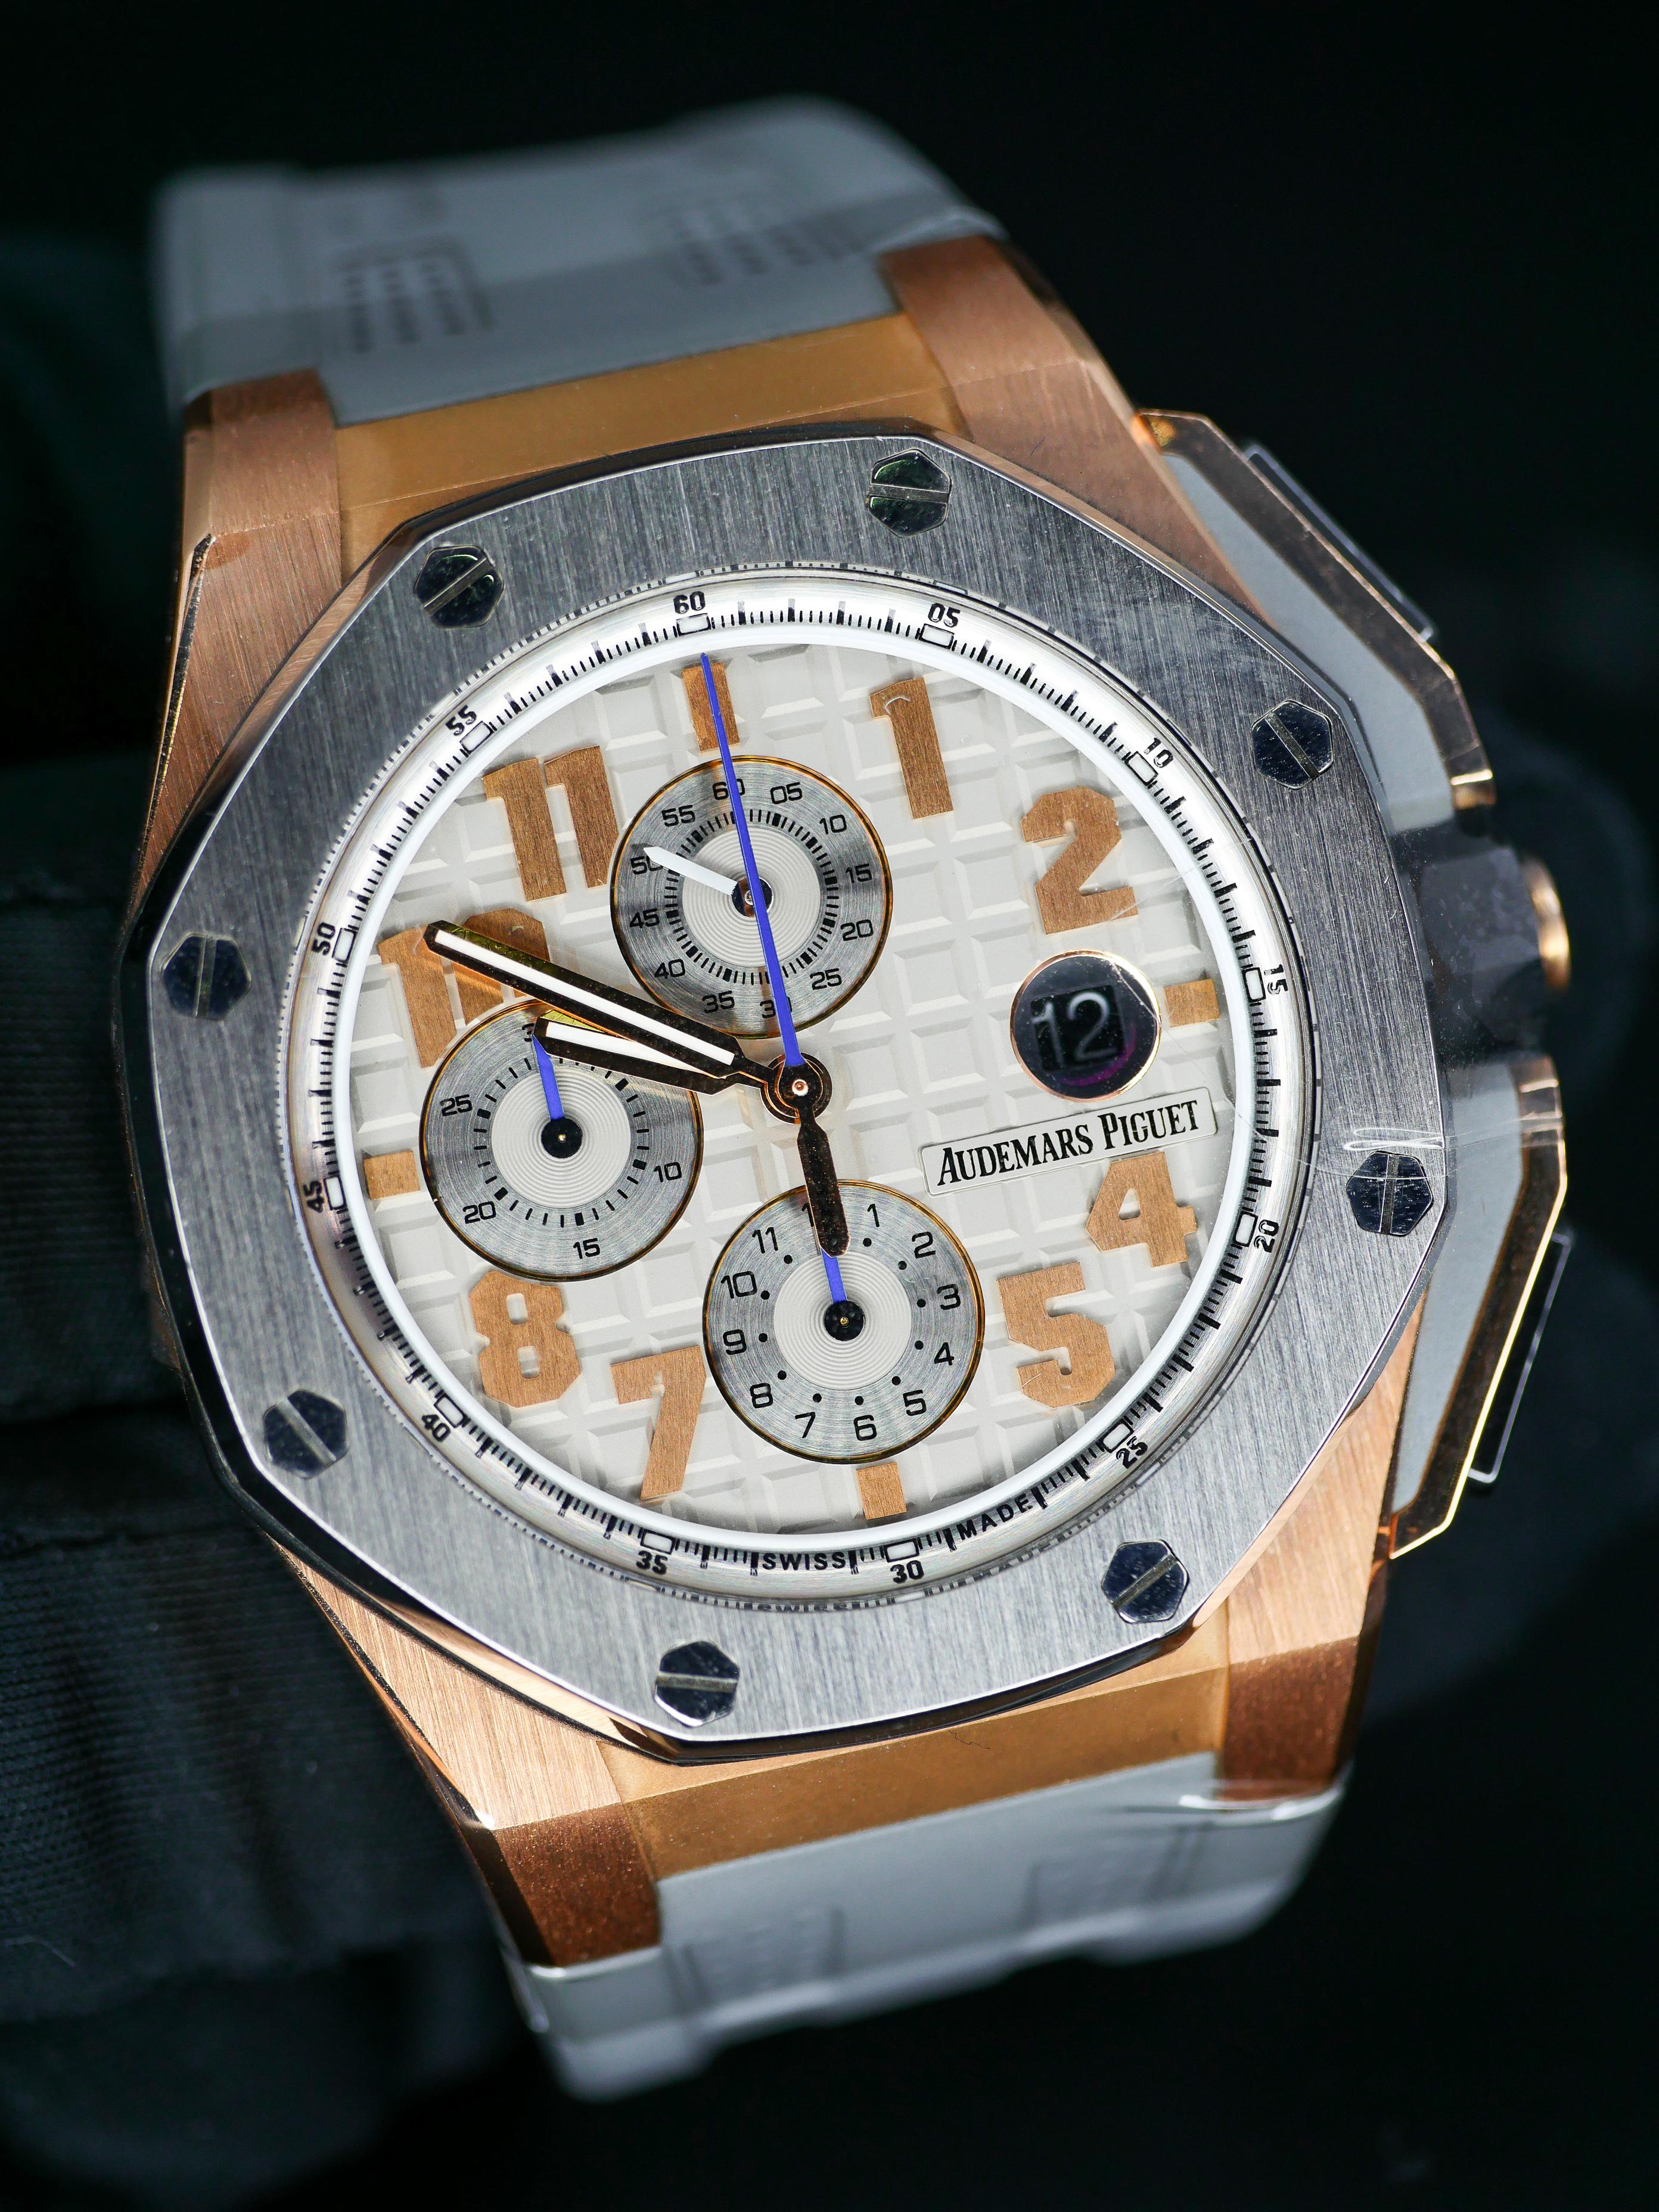 Audemars Piguet Royal Oak Offshore LeBron James limited edition 44MM

The watch is still instantly recognizable as a Royal Oak Offshore, with its famous octagonal case and “mega-tapisserie” patterned dial. The case is in 18k rose gold and also